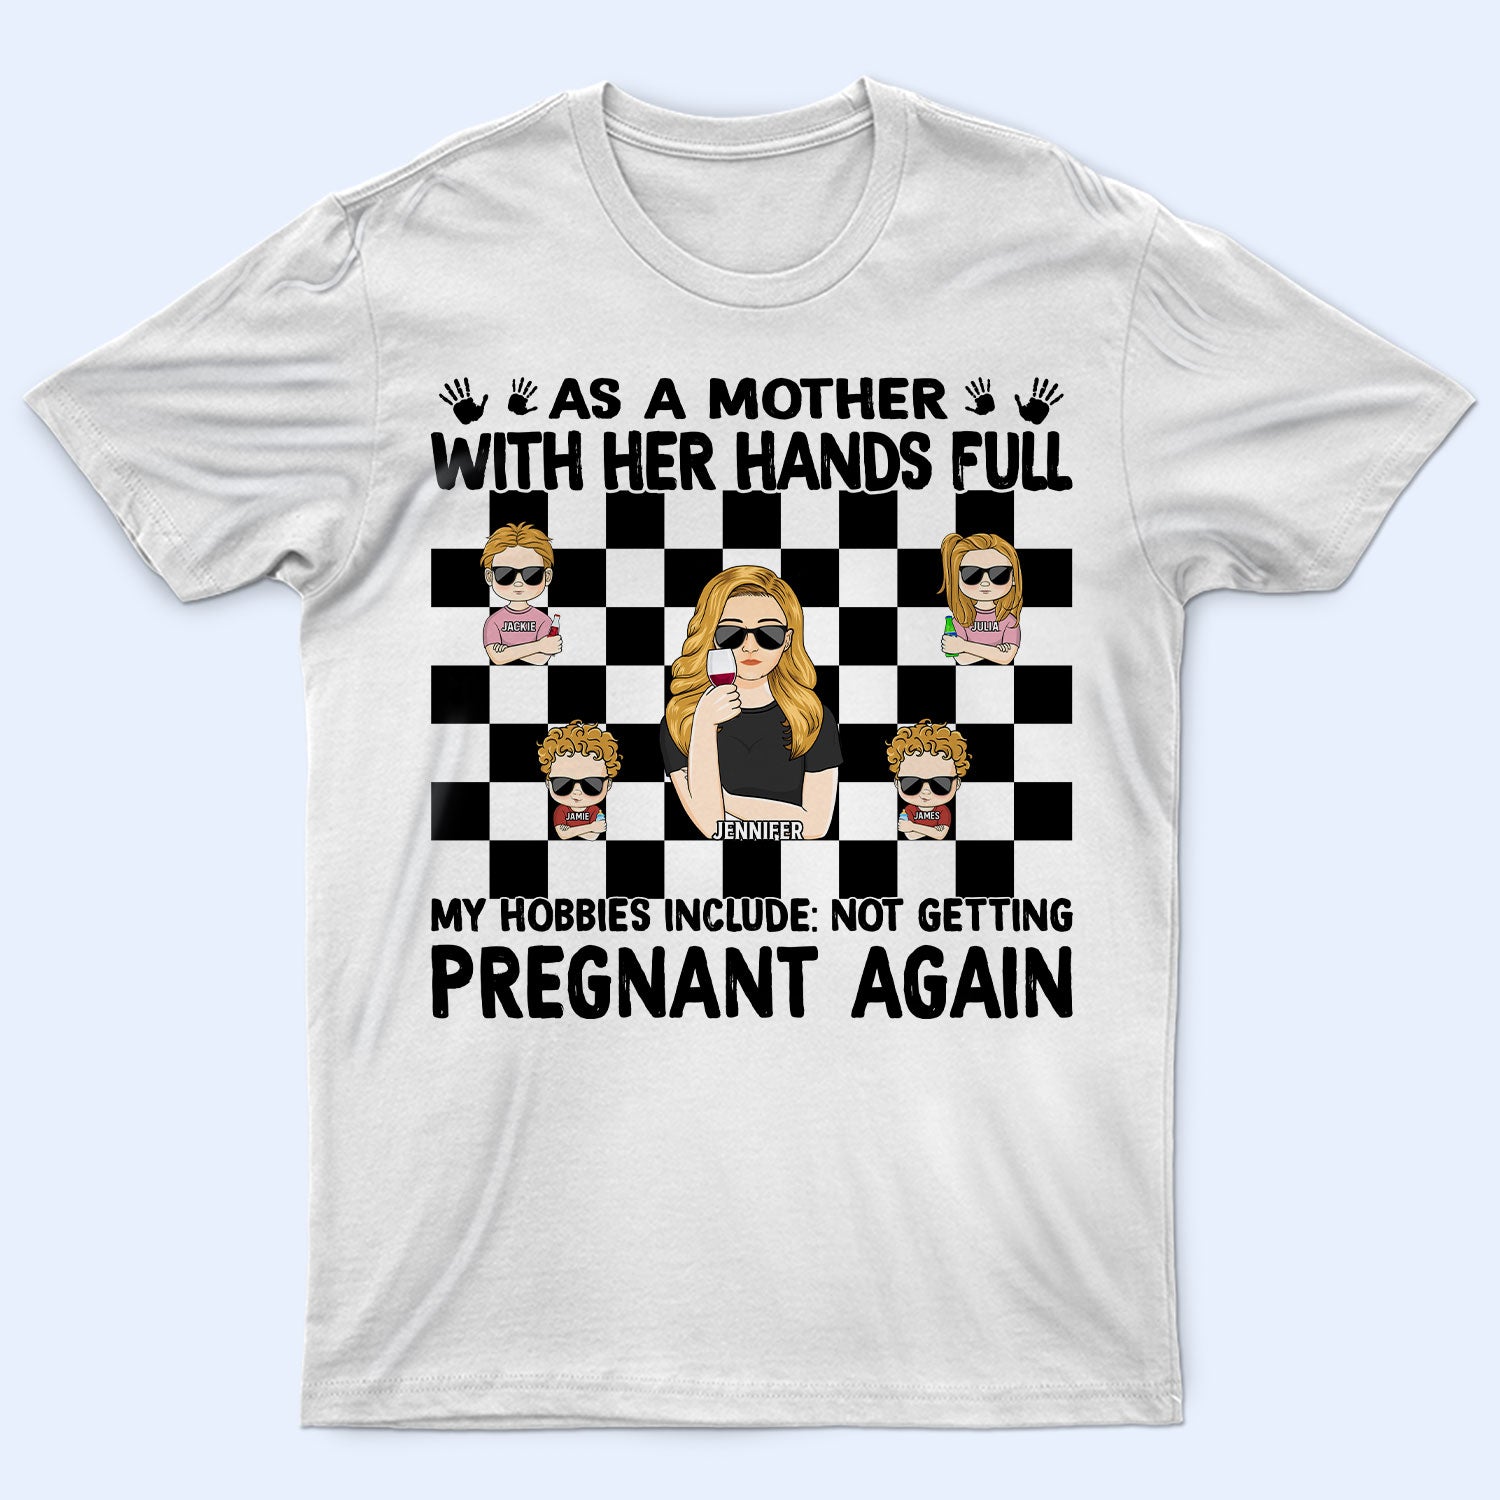 With Her Hands Full - Gift For Mother - Personalized Custom T Shirt